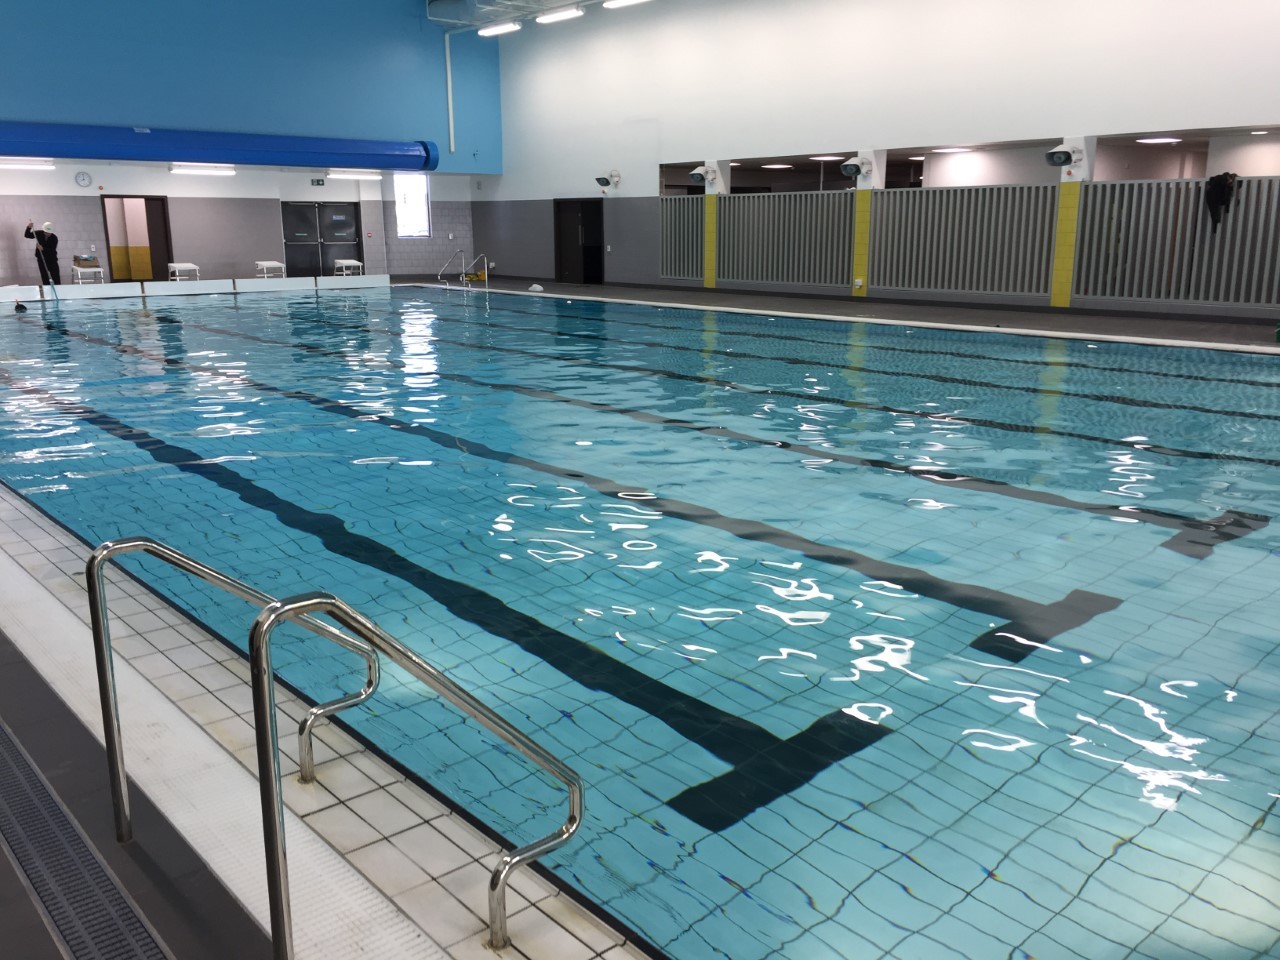 New Clydebank Leisure Centre to open next Friday, officials announce - Clydebank Post